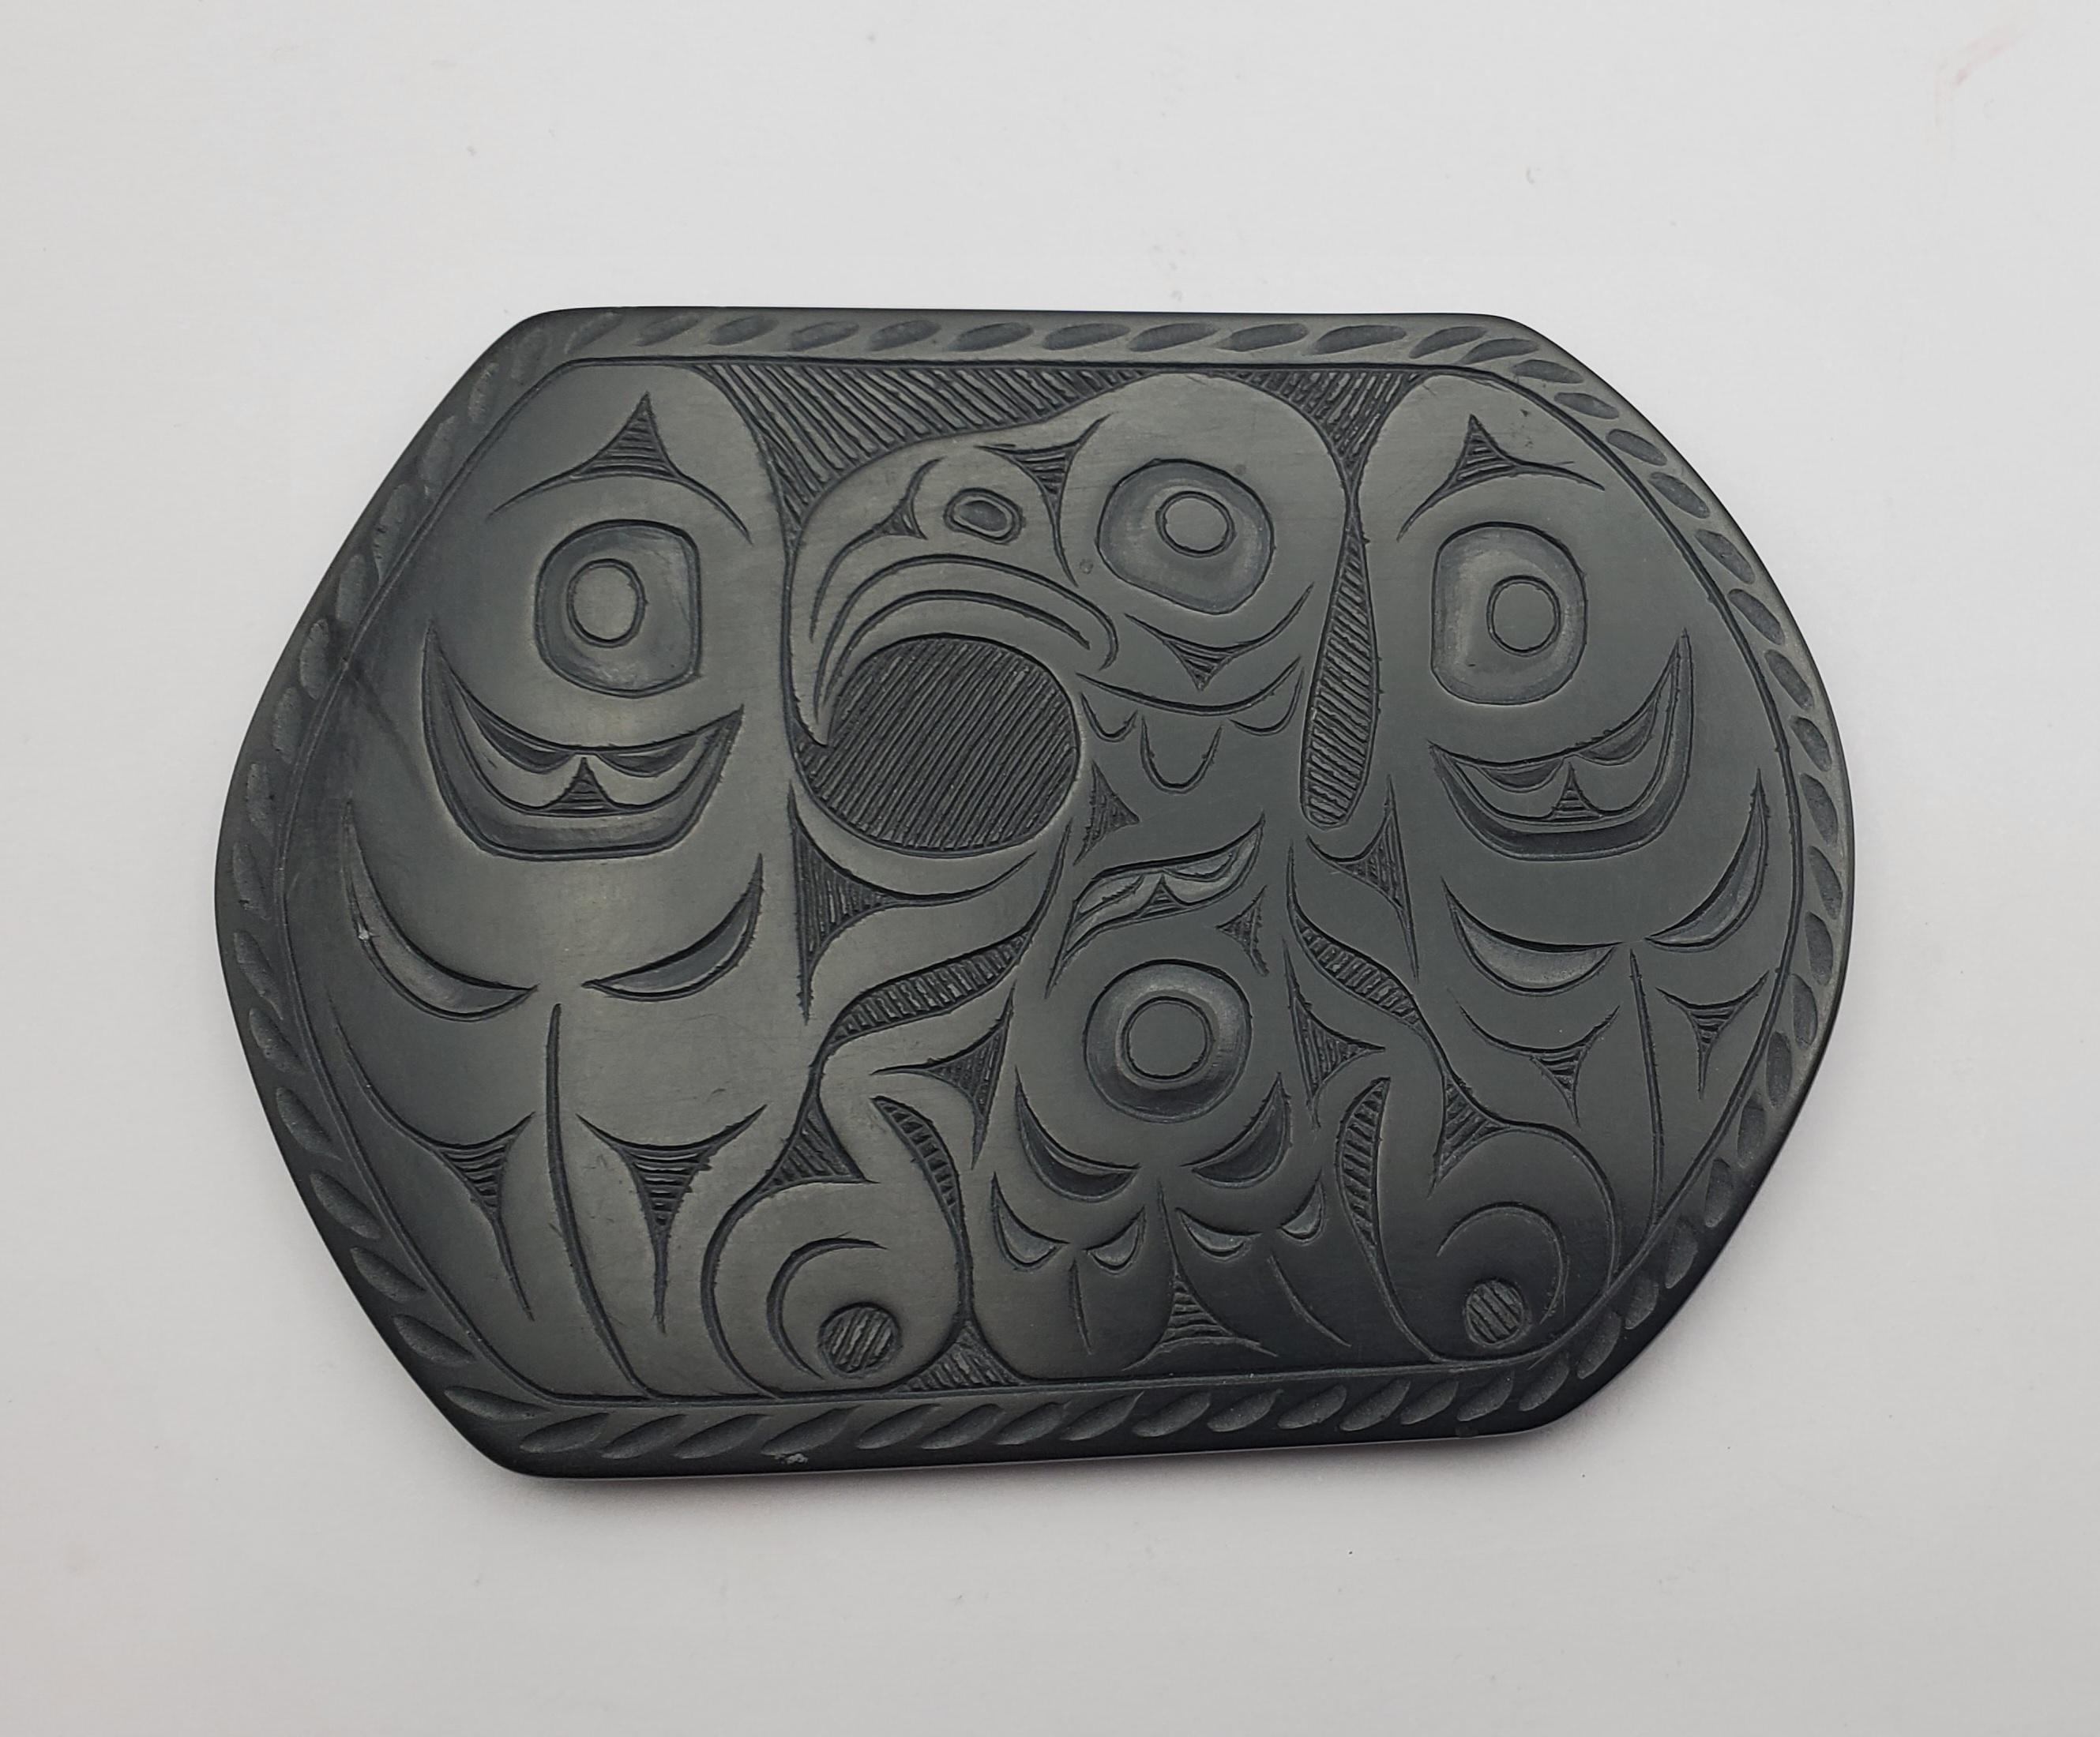 Striking Argillite tray by First Nations carver Pat Dixon. Argillite is a hard black stone found in the Queen Charlotte Islands. The back of the tray is signed Pat Dixon 8/96.

Haida carver Pat Dixon was born in 1938 in Skidegate on Haida Gwaii and